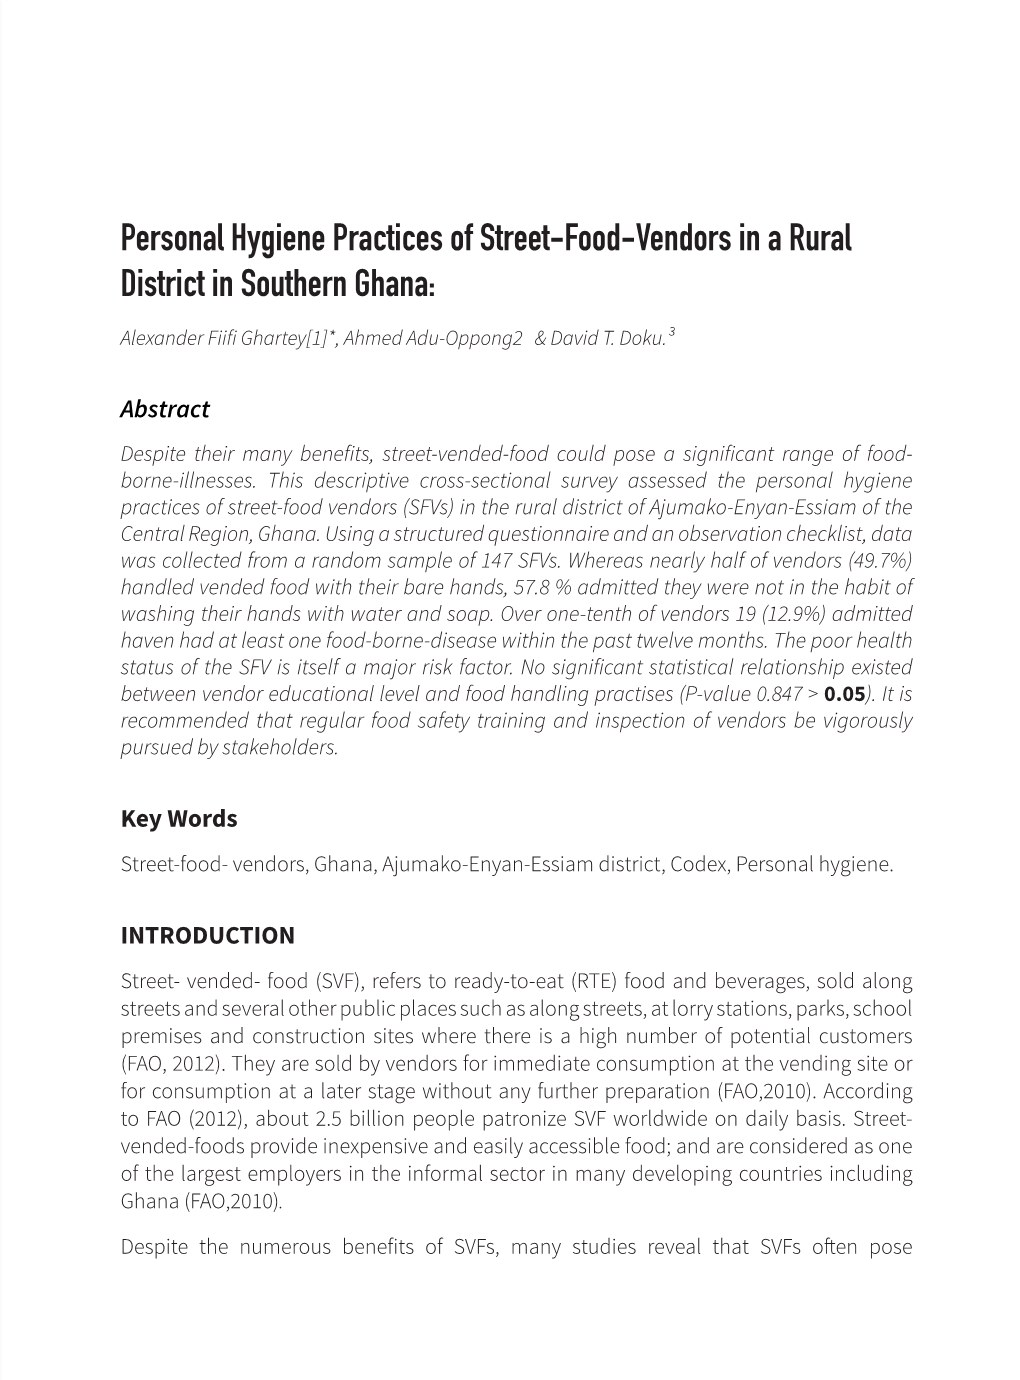 Personal Hygiene Practices of Street-Food-Vendors in a Rural District in Southern Ghana